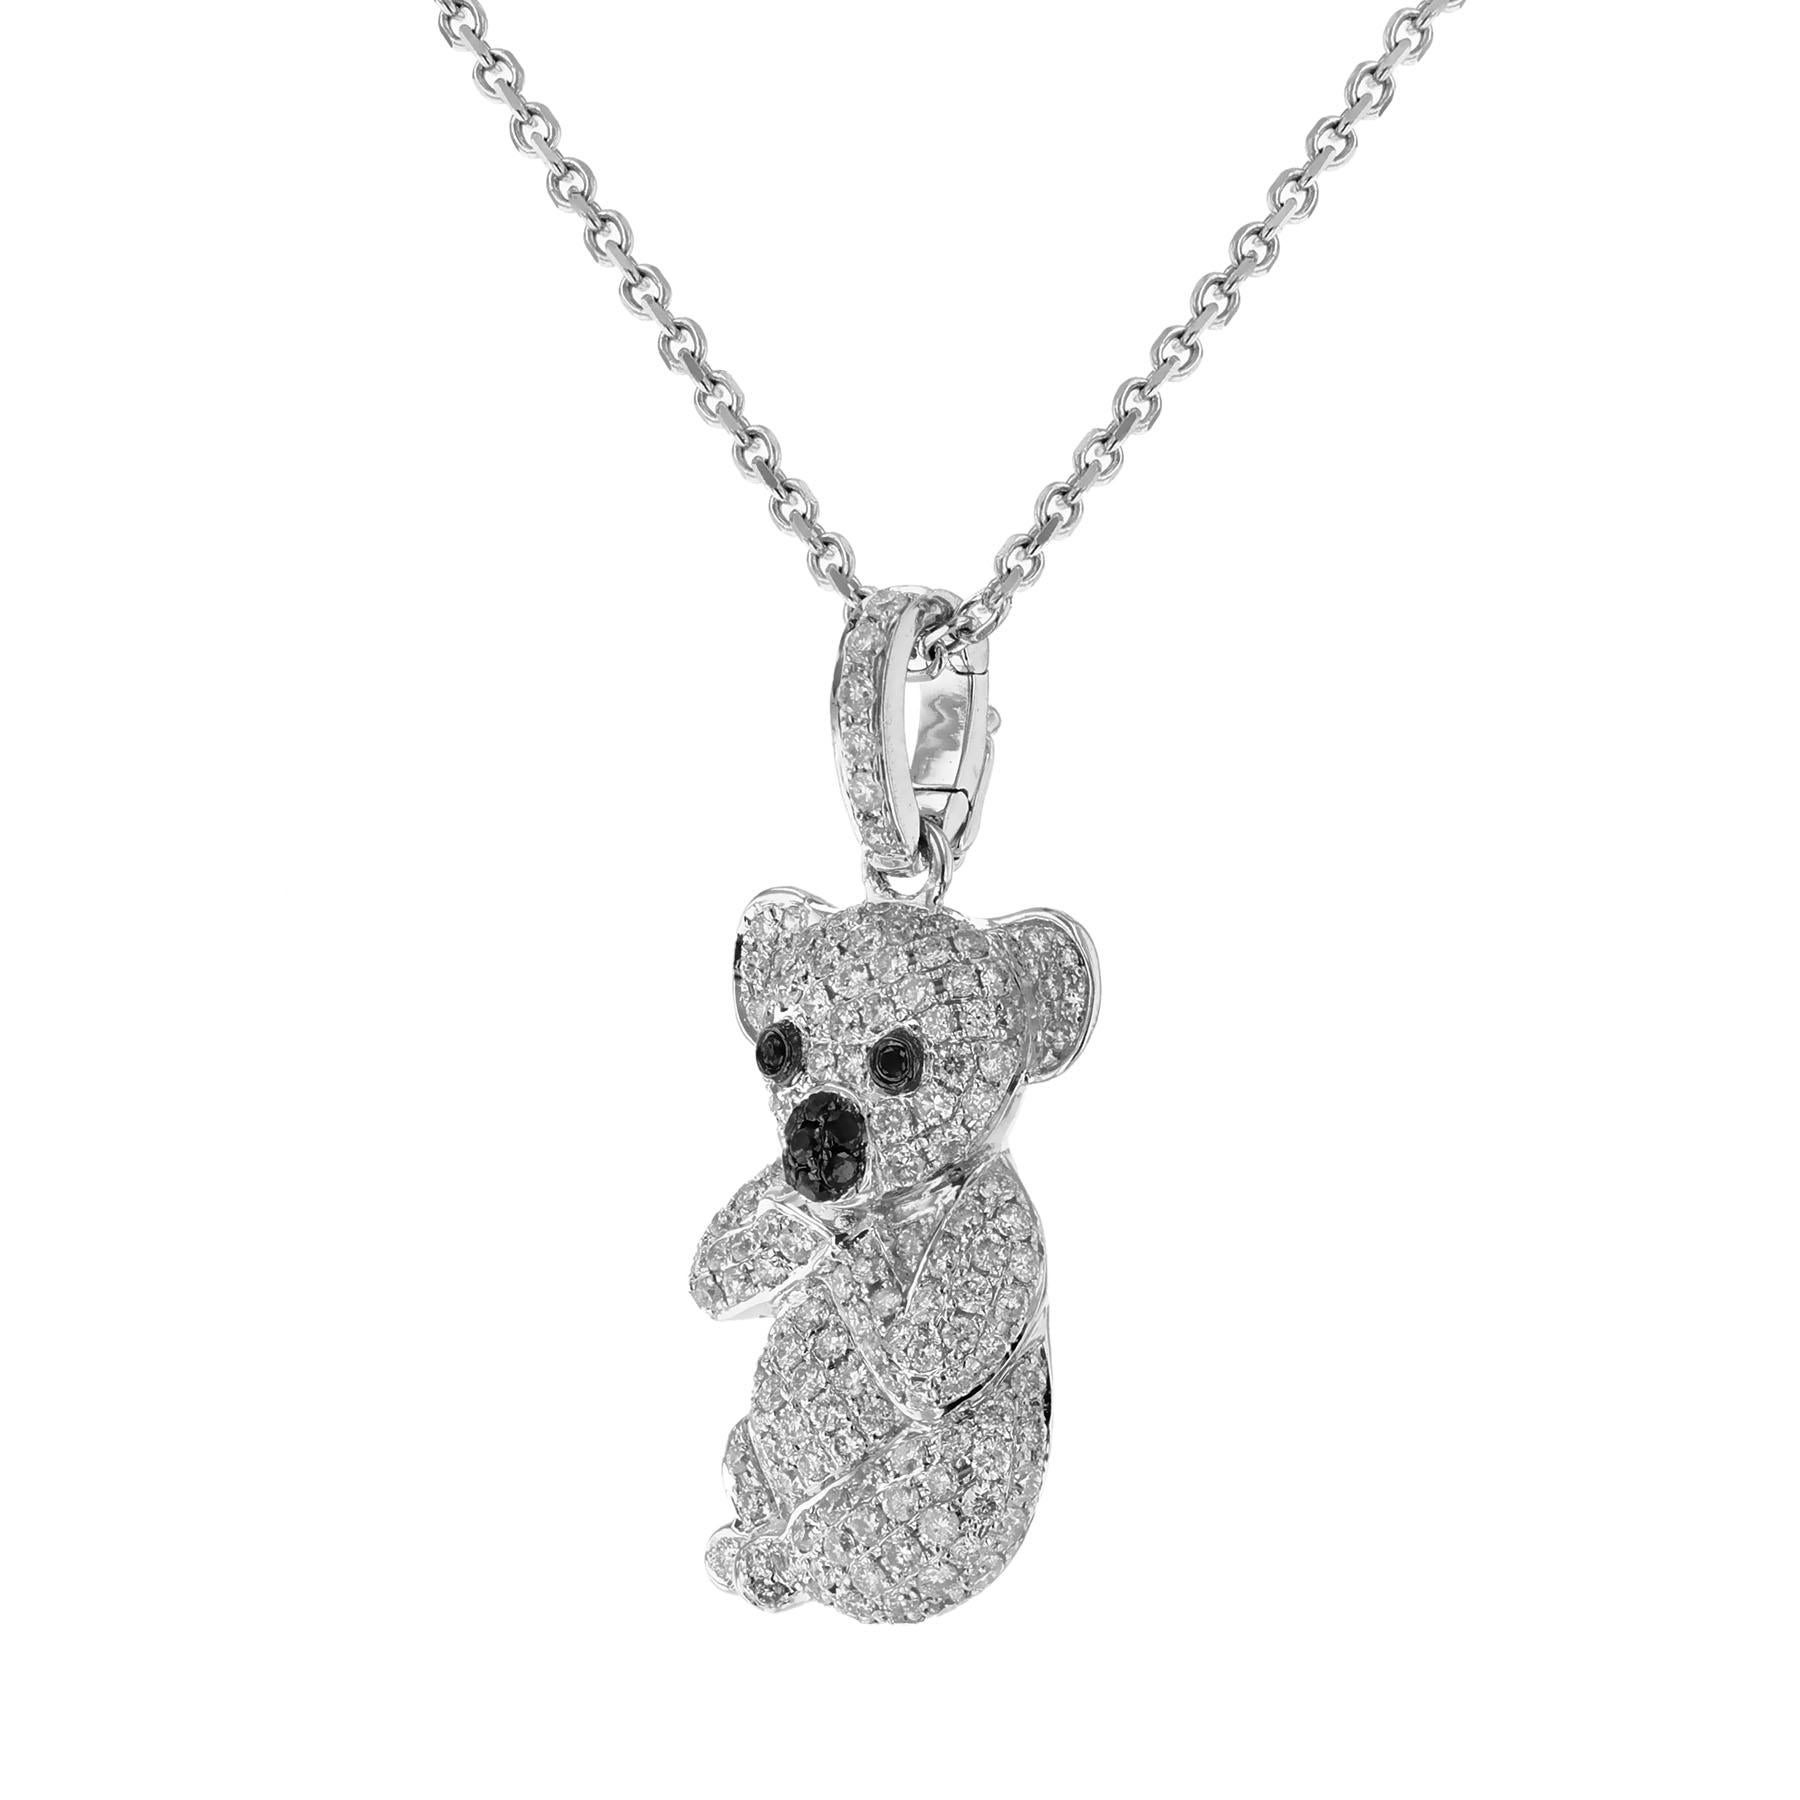 This pendant necklace is made in 14 Karat White Gold. It features koala bear encrusted pendant of 162 round cut diamonds weighing 0.89 carats. The necklace has a color grade H and clarity grades  I1 and SI2. 
